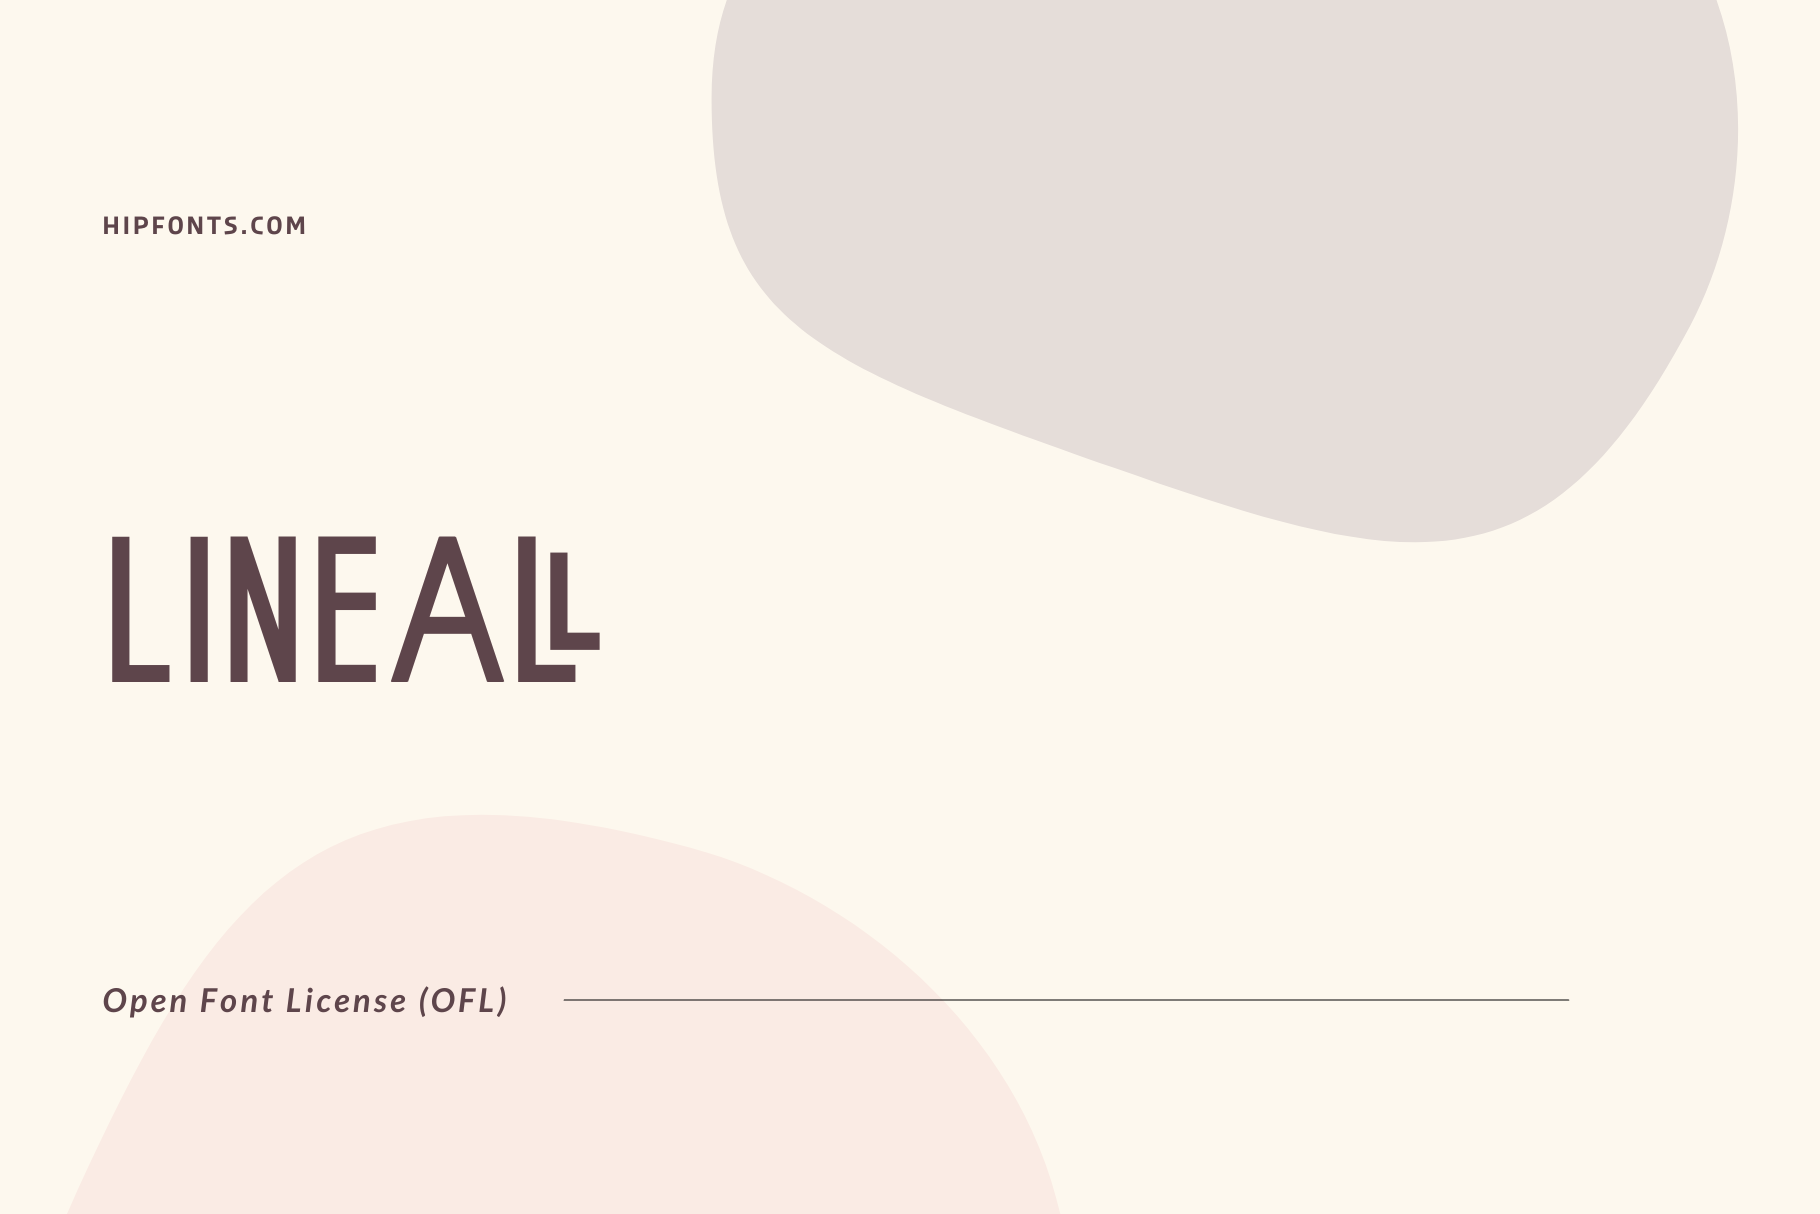 Lineal free font